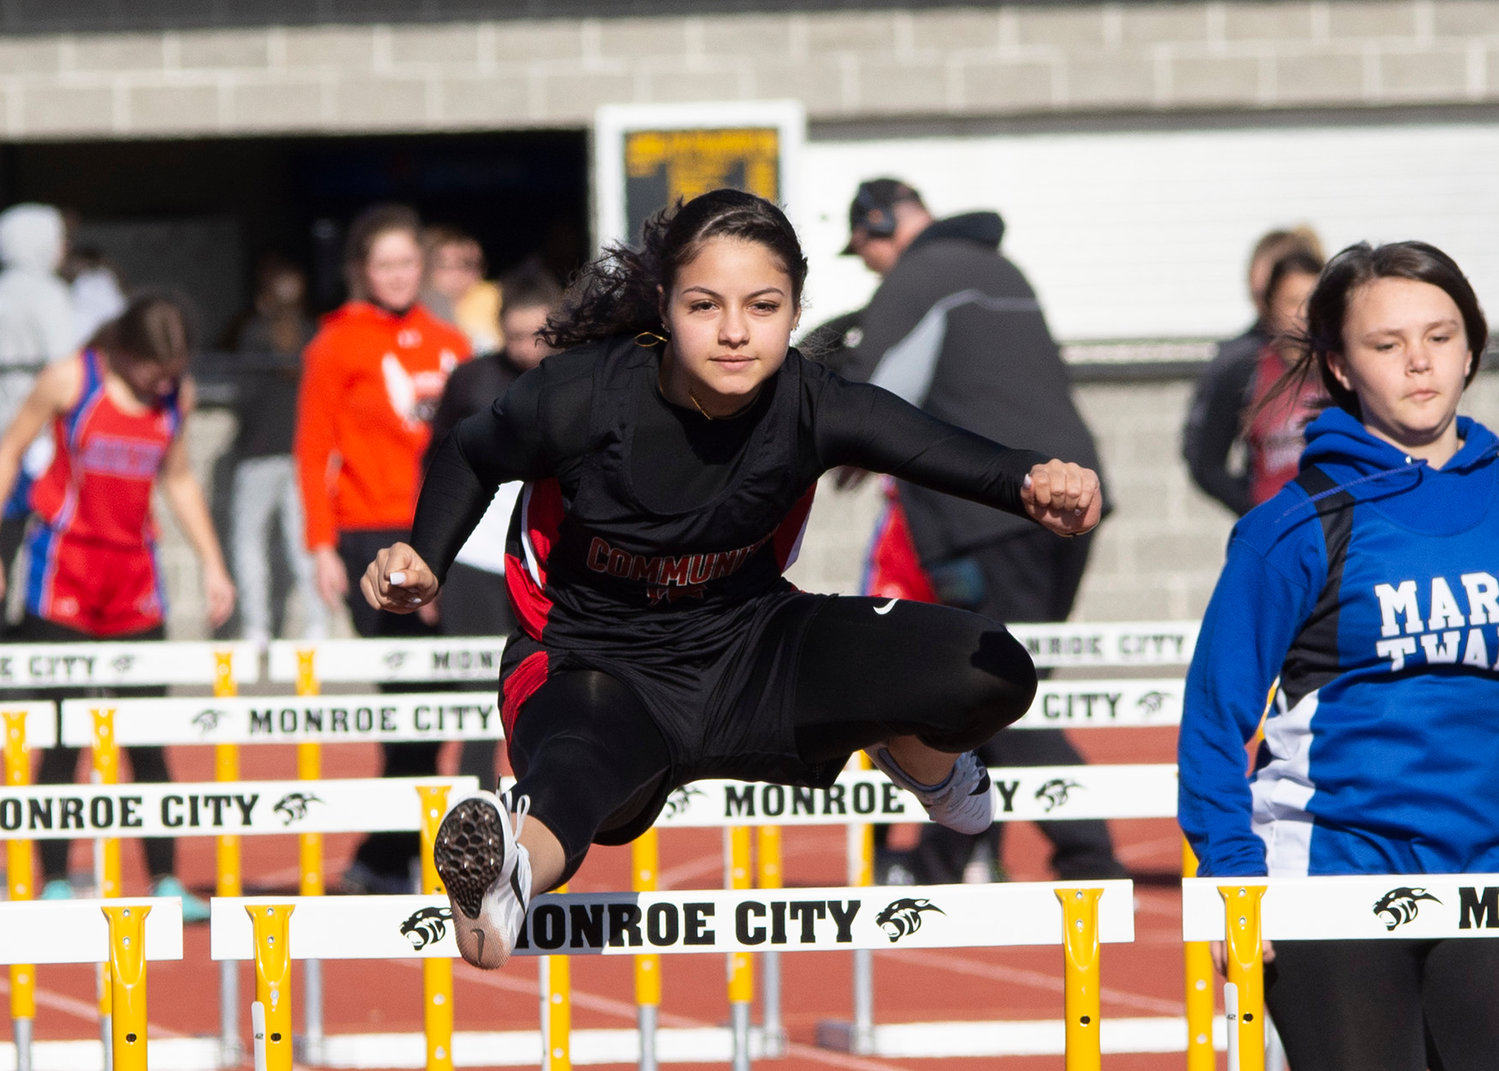 Trojans' Sophomore Victoria DiSalvo competes in the 100 meter hurdles on Thursday in the Monroe City Invitational. She finished in the points, crossing the line eighth. [Leslie A. Meyer Photography]